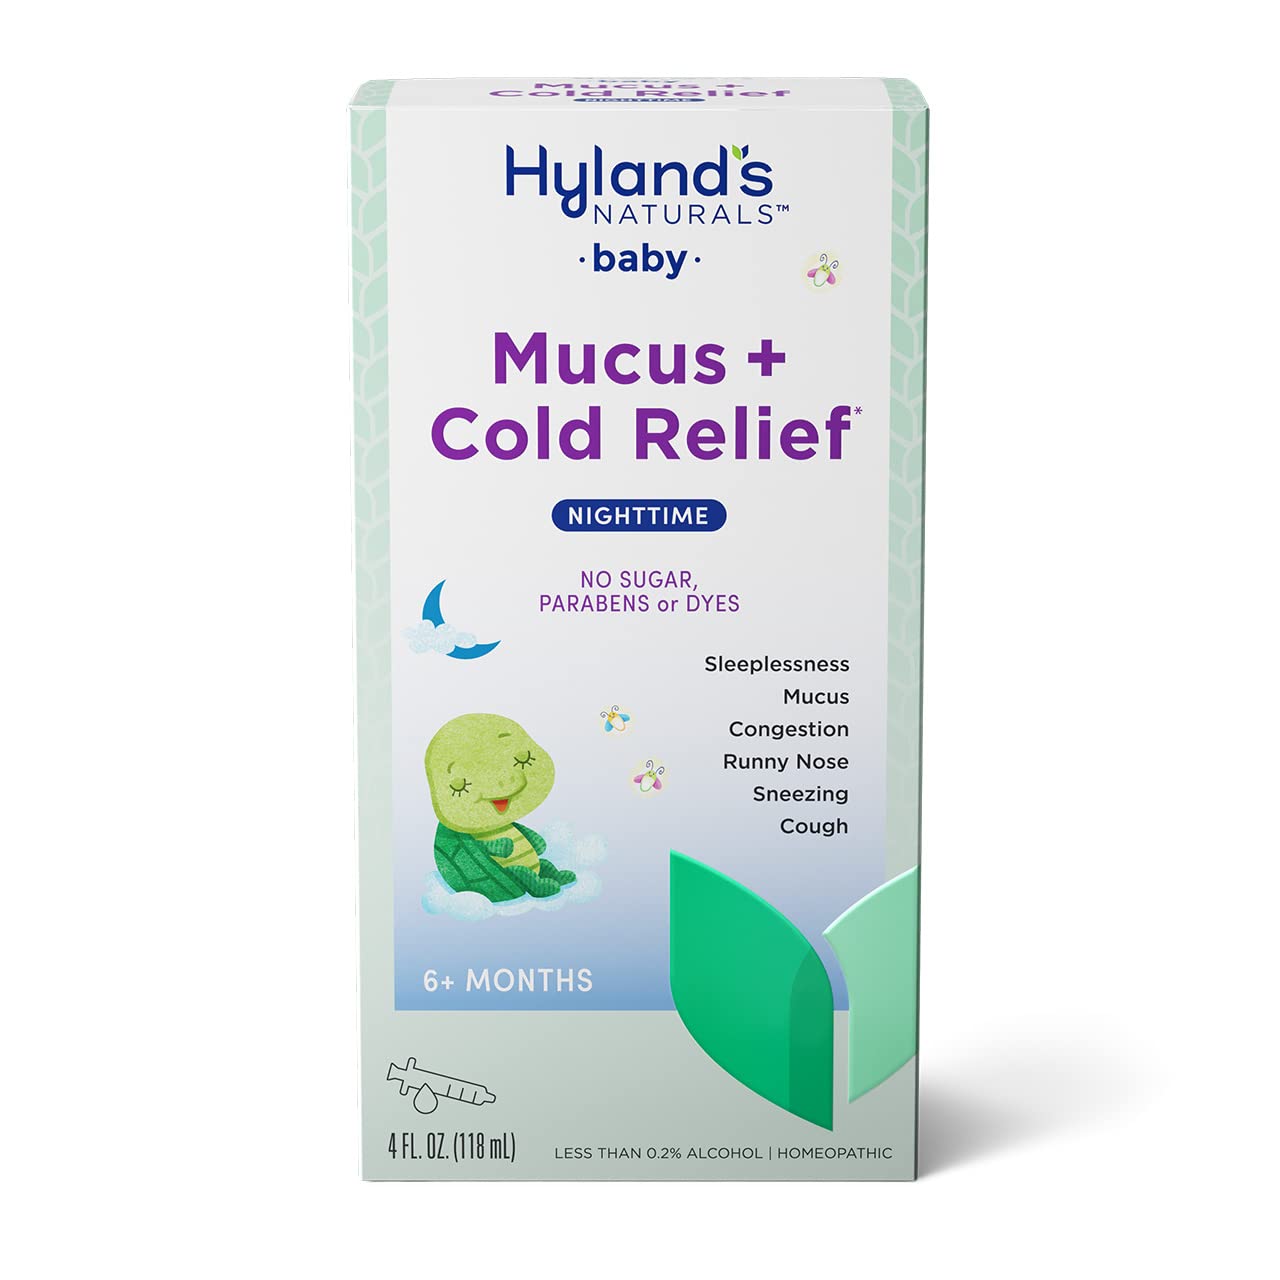 Hyland’s Naturals Baby Mucus and Cold Relief, Nighttime Baby Cold Medicine, Infant Cold and Cough Remedy, Decongestant, 4 Fluid Ounce